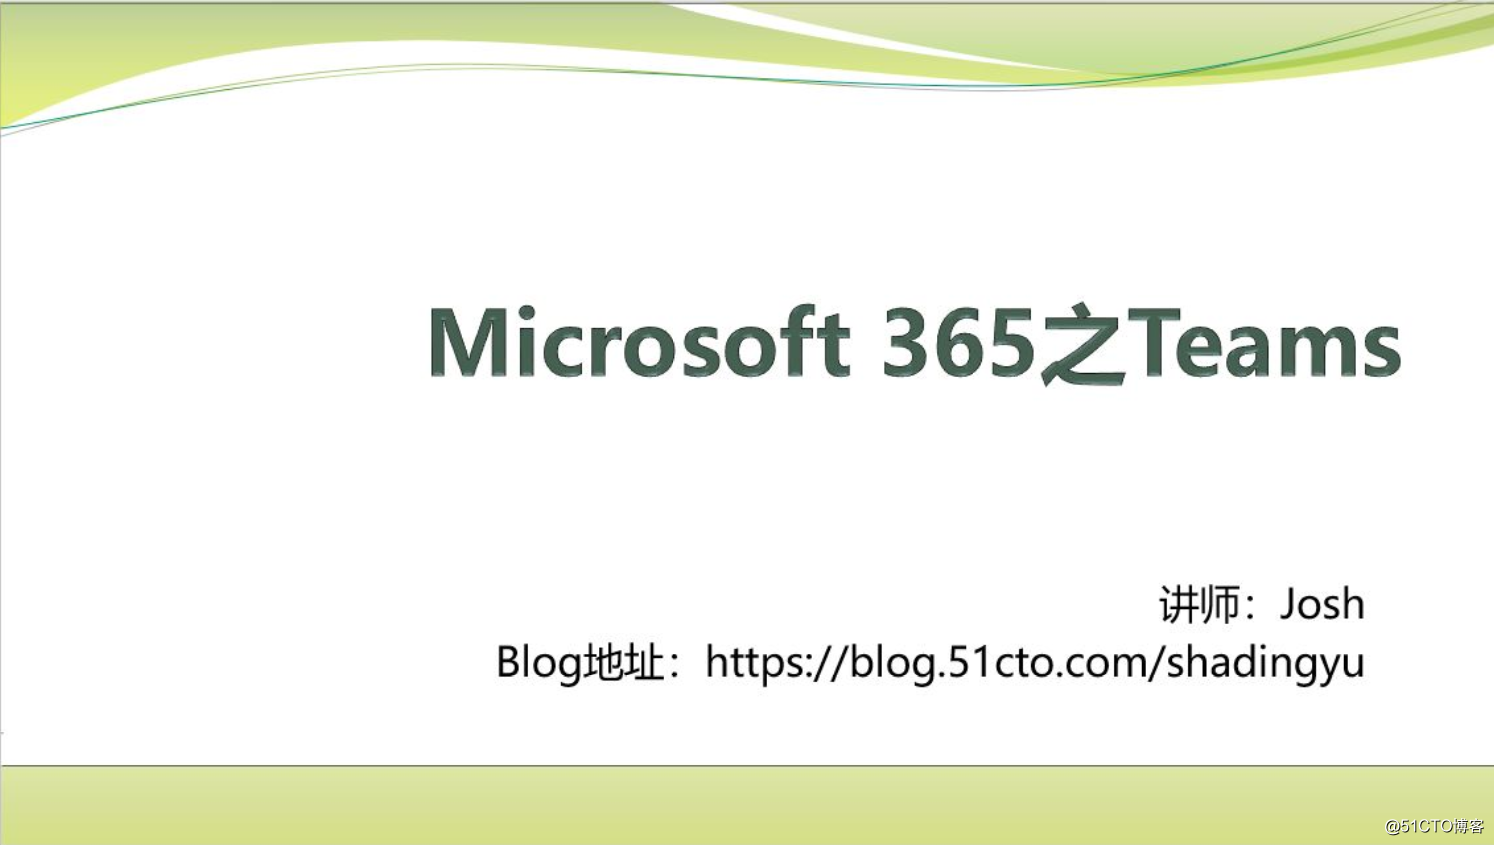 Teams Video Course for Microsoft 365 is online